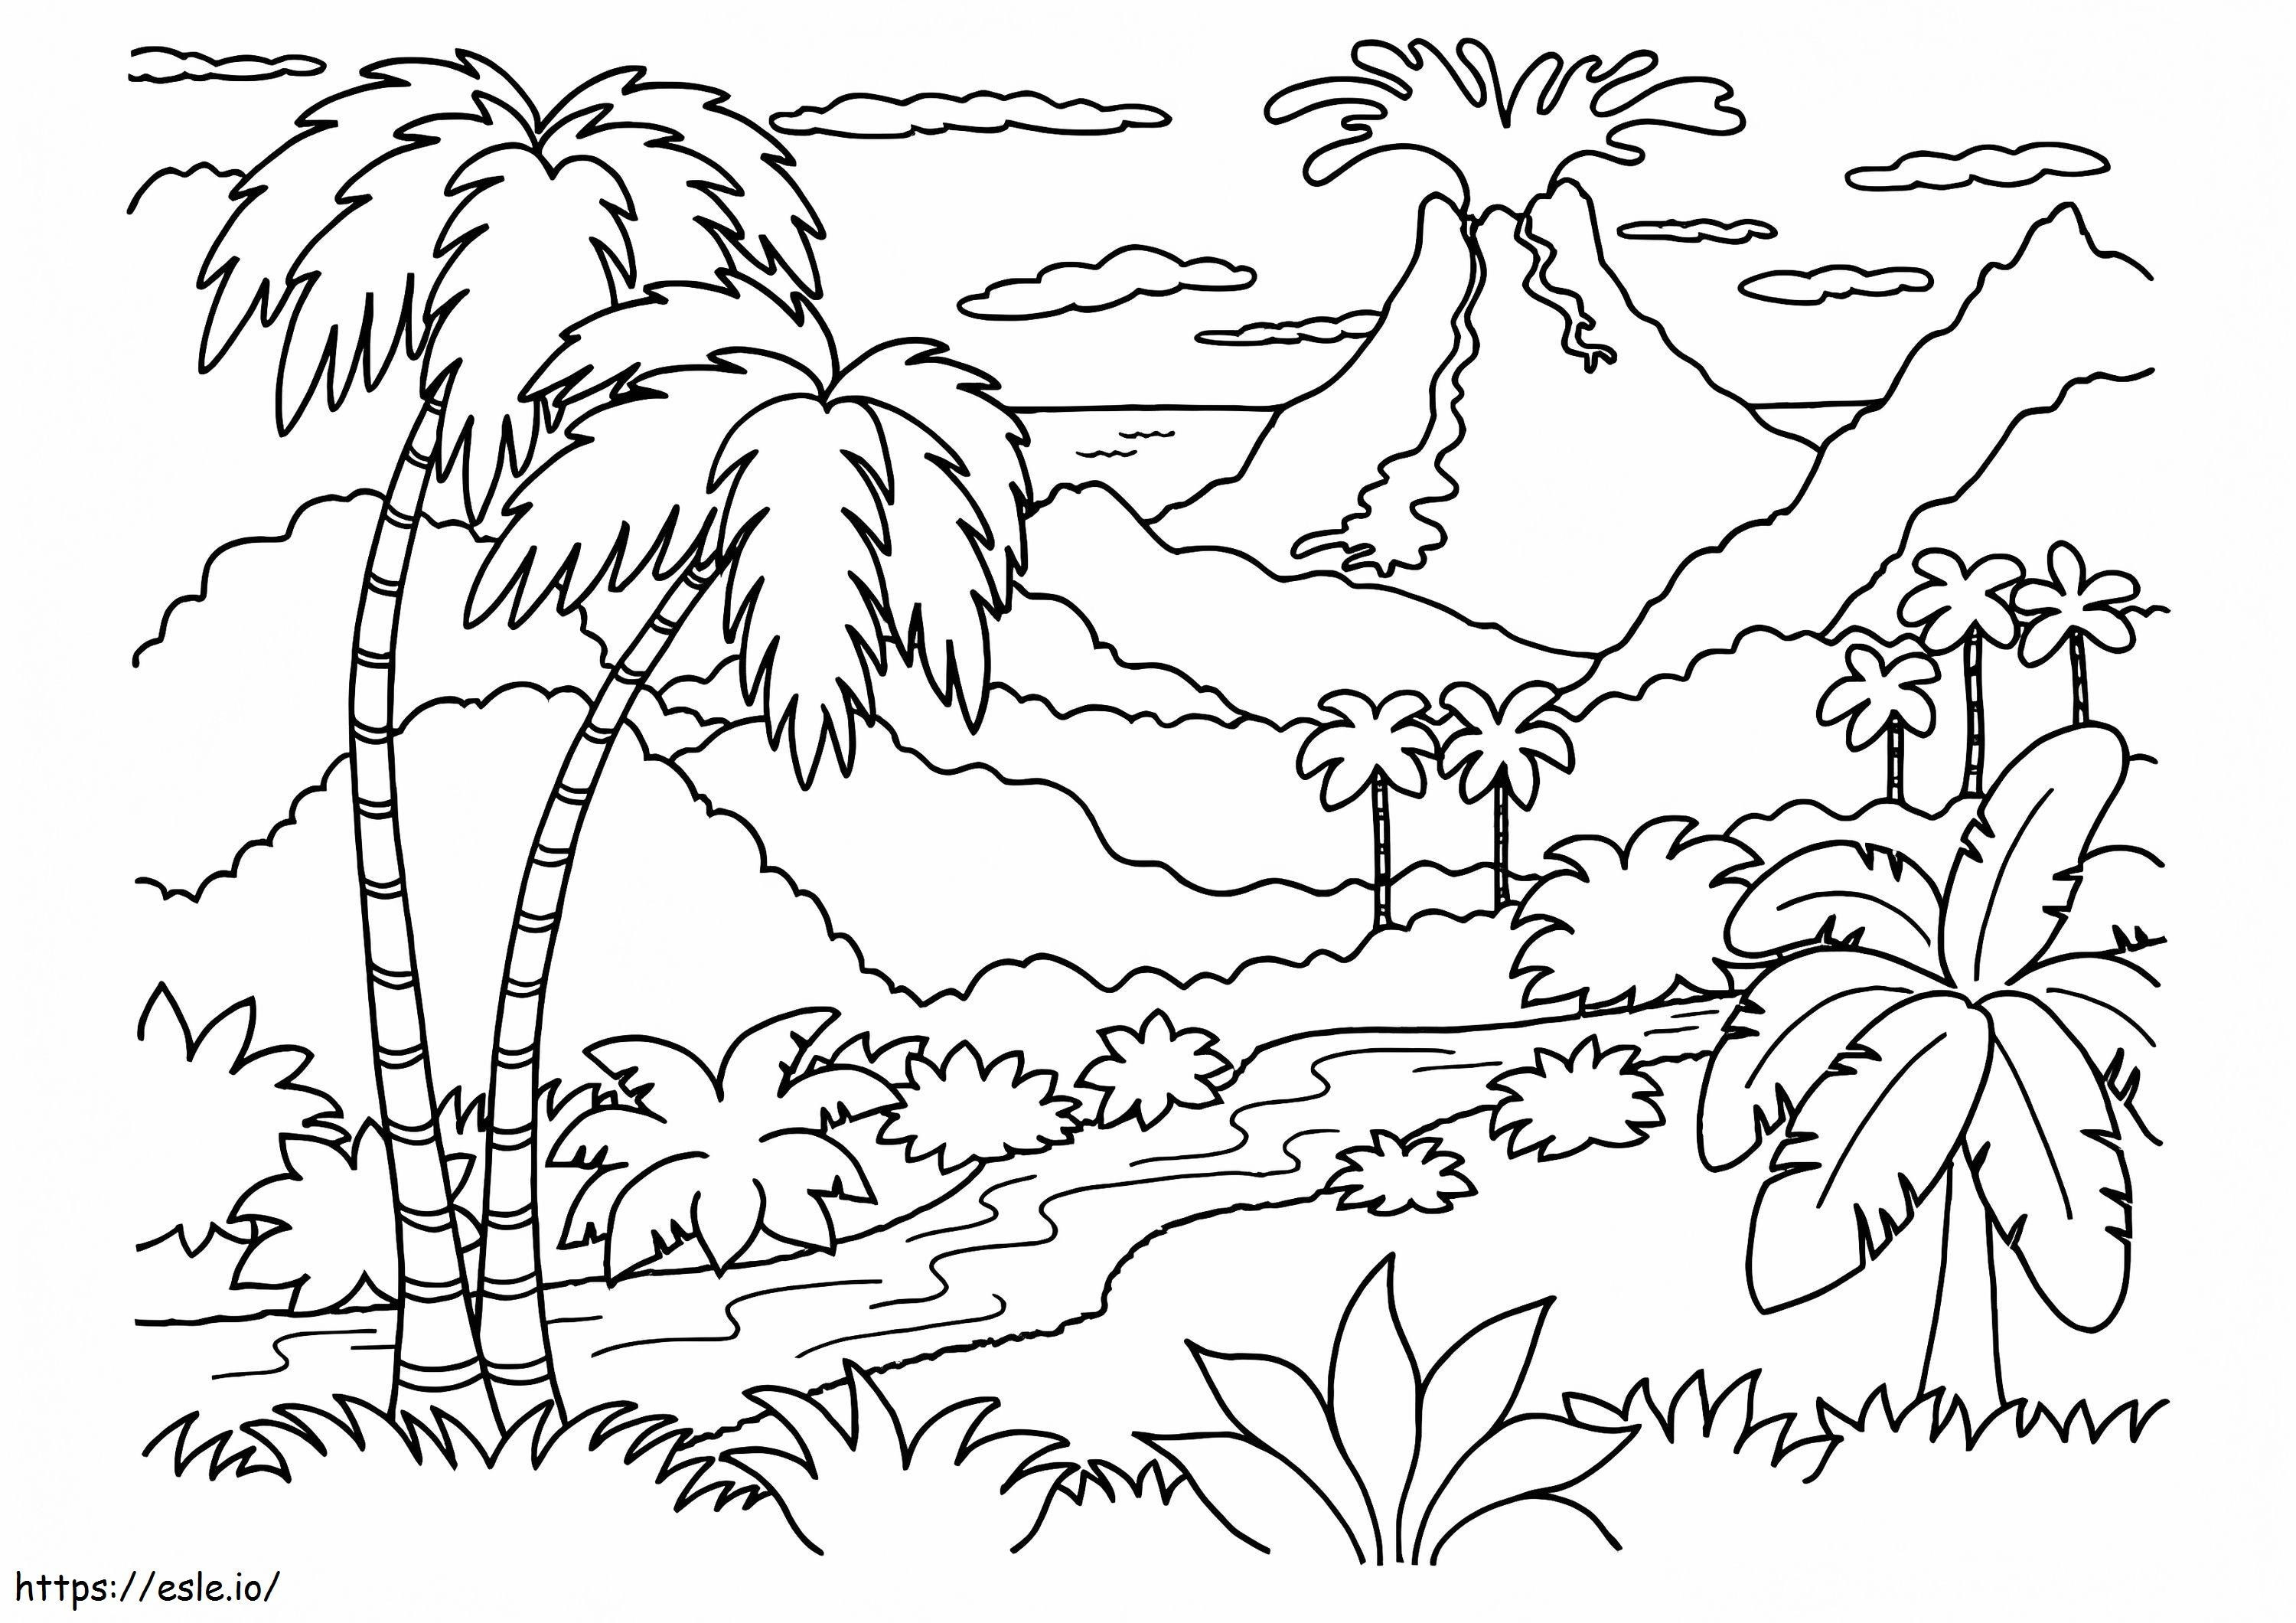 The Forest Volcano coloring page